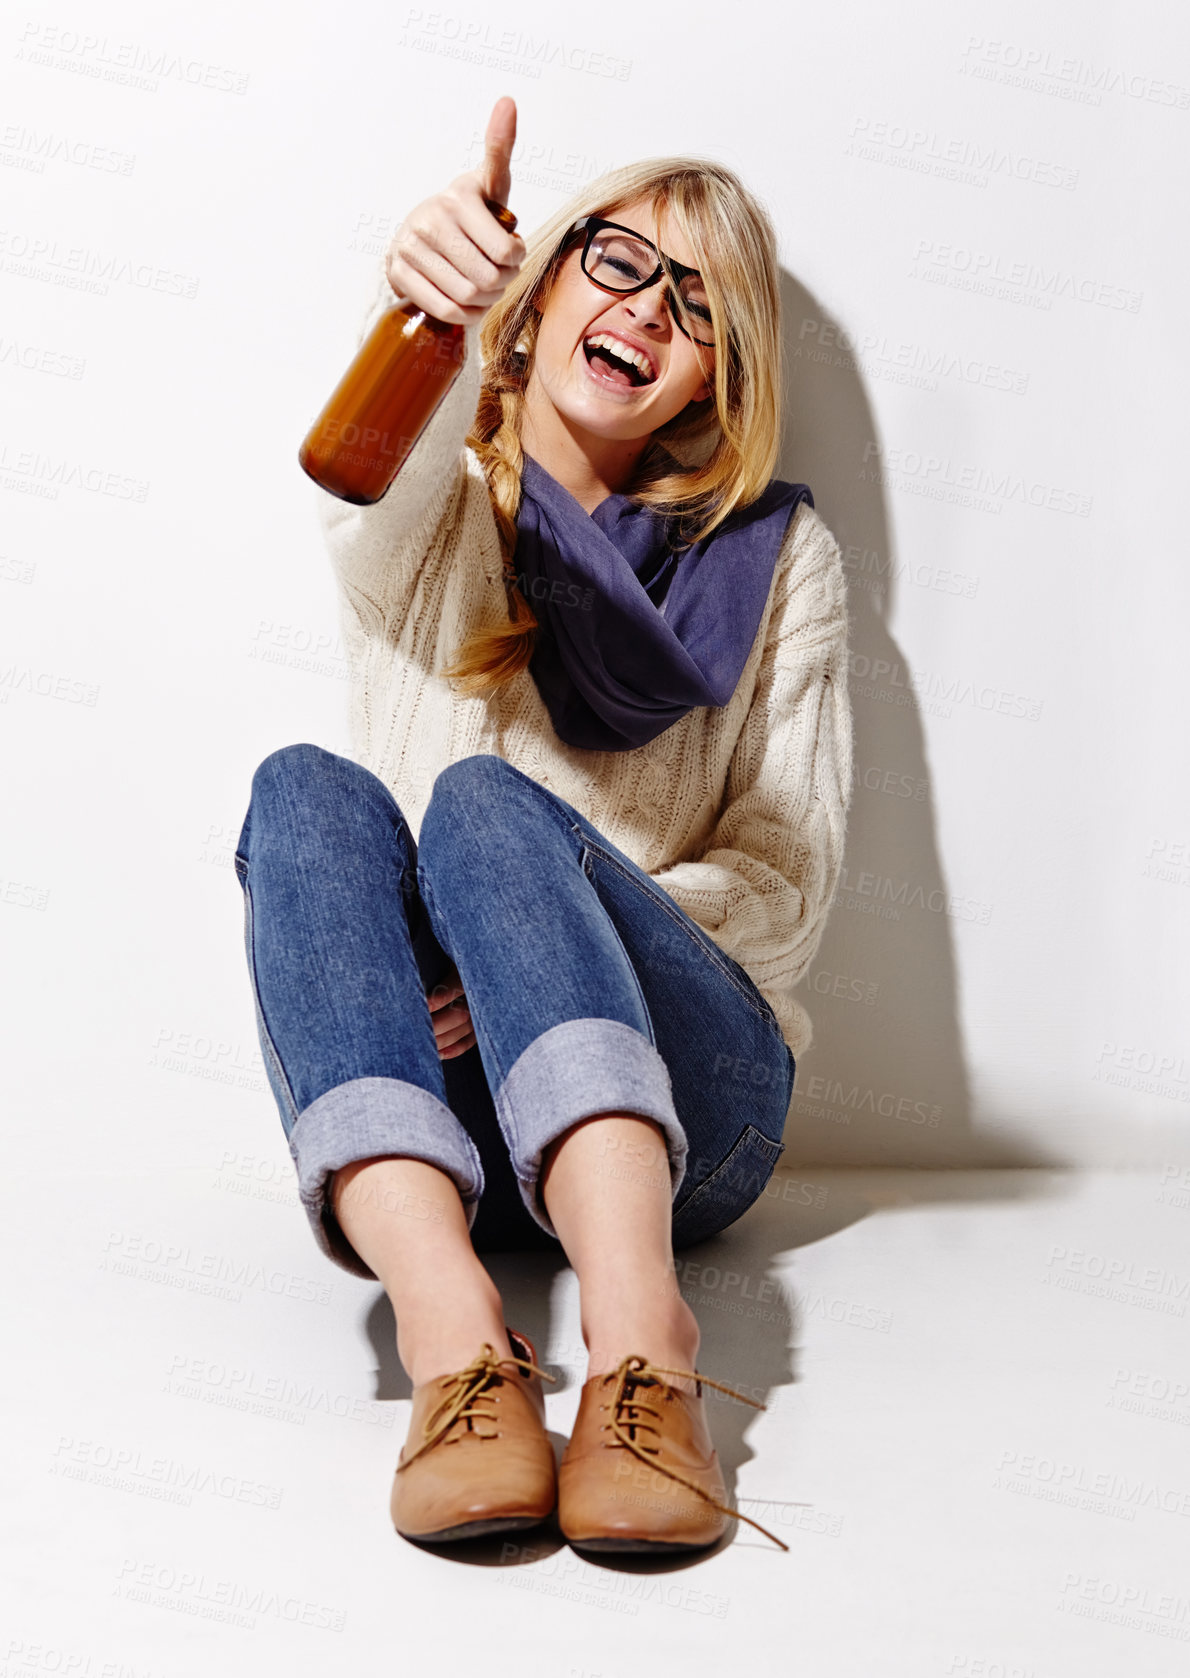 Buy stock photo Full length studio portrait of a young woman having a beer while leaning against a wall